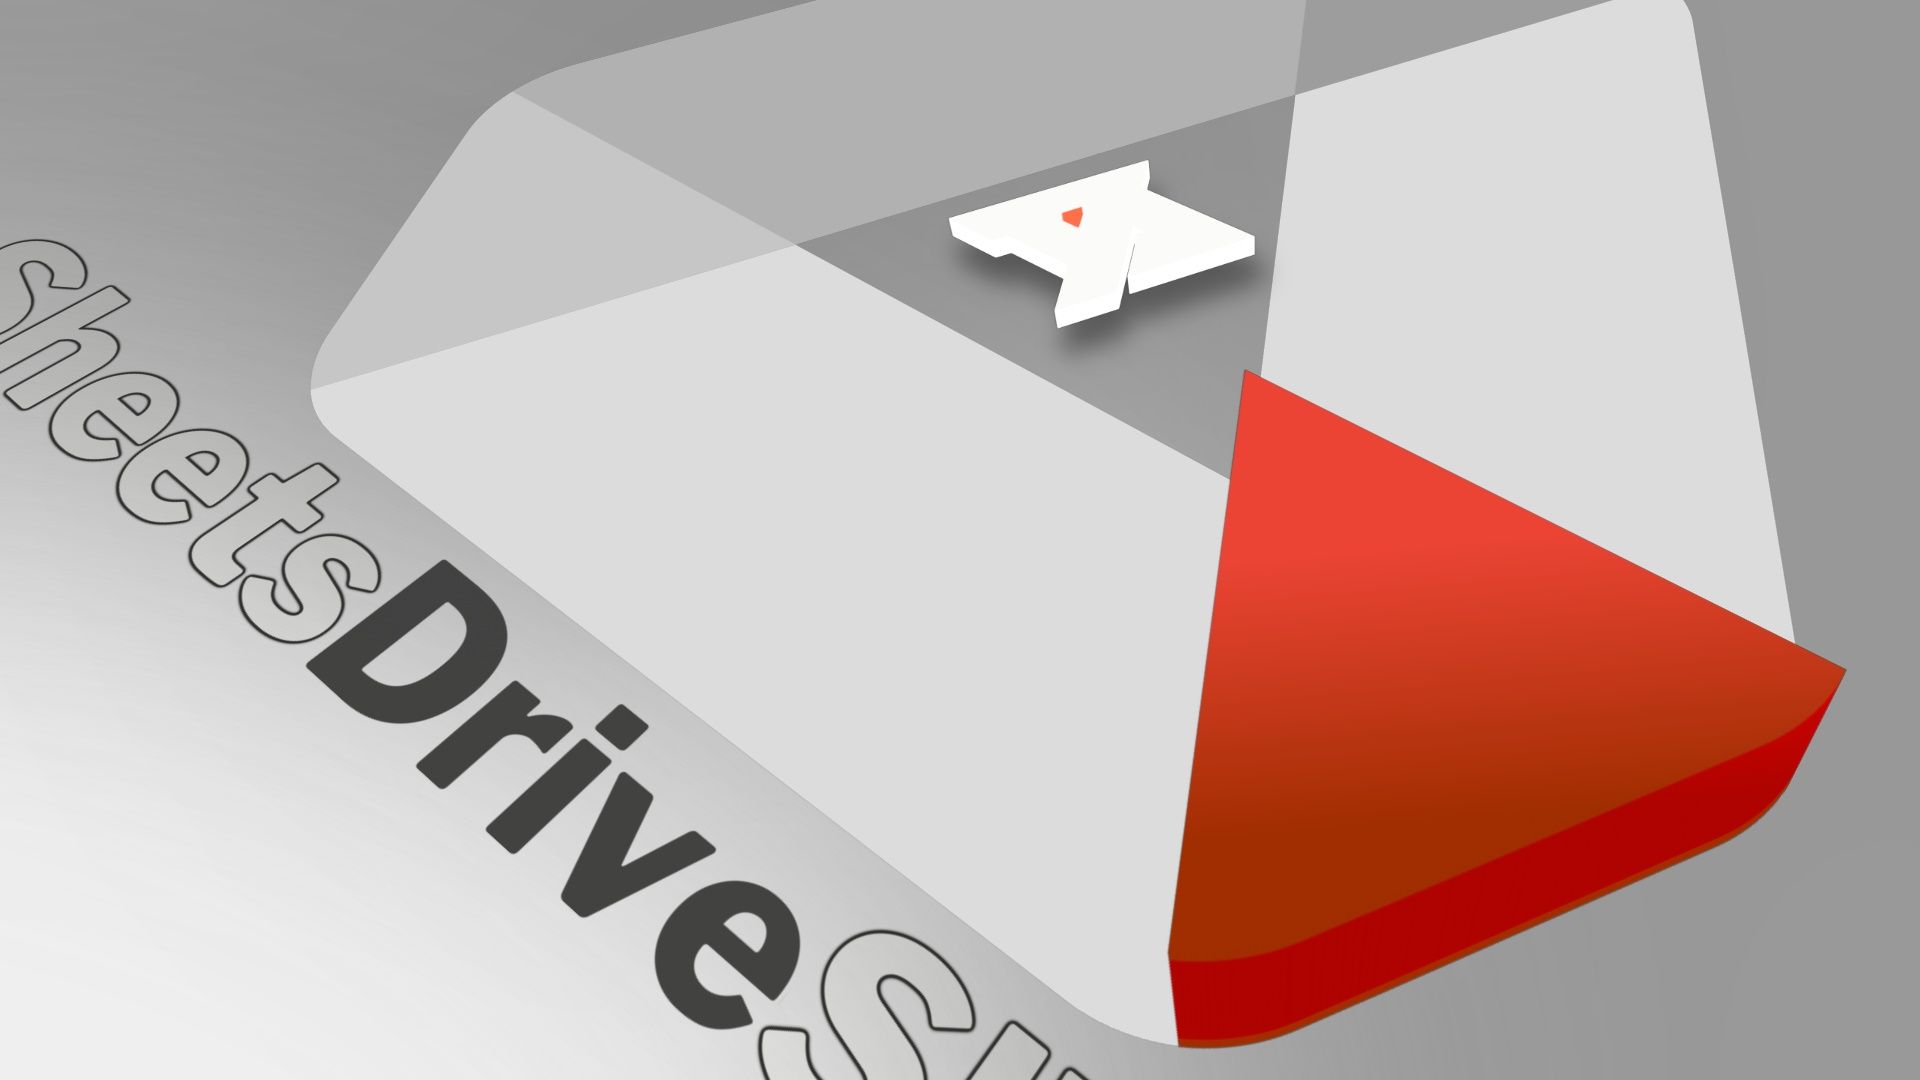 The Google Drive logo with text showing Sheets and Drive